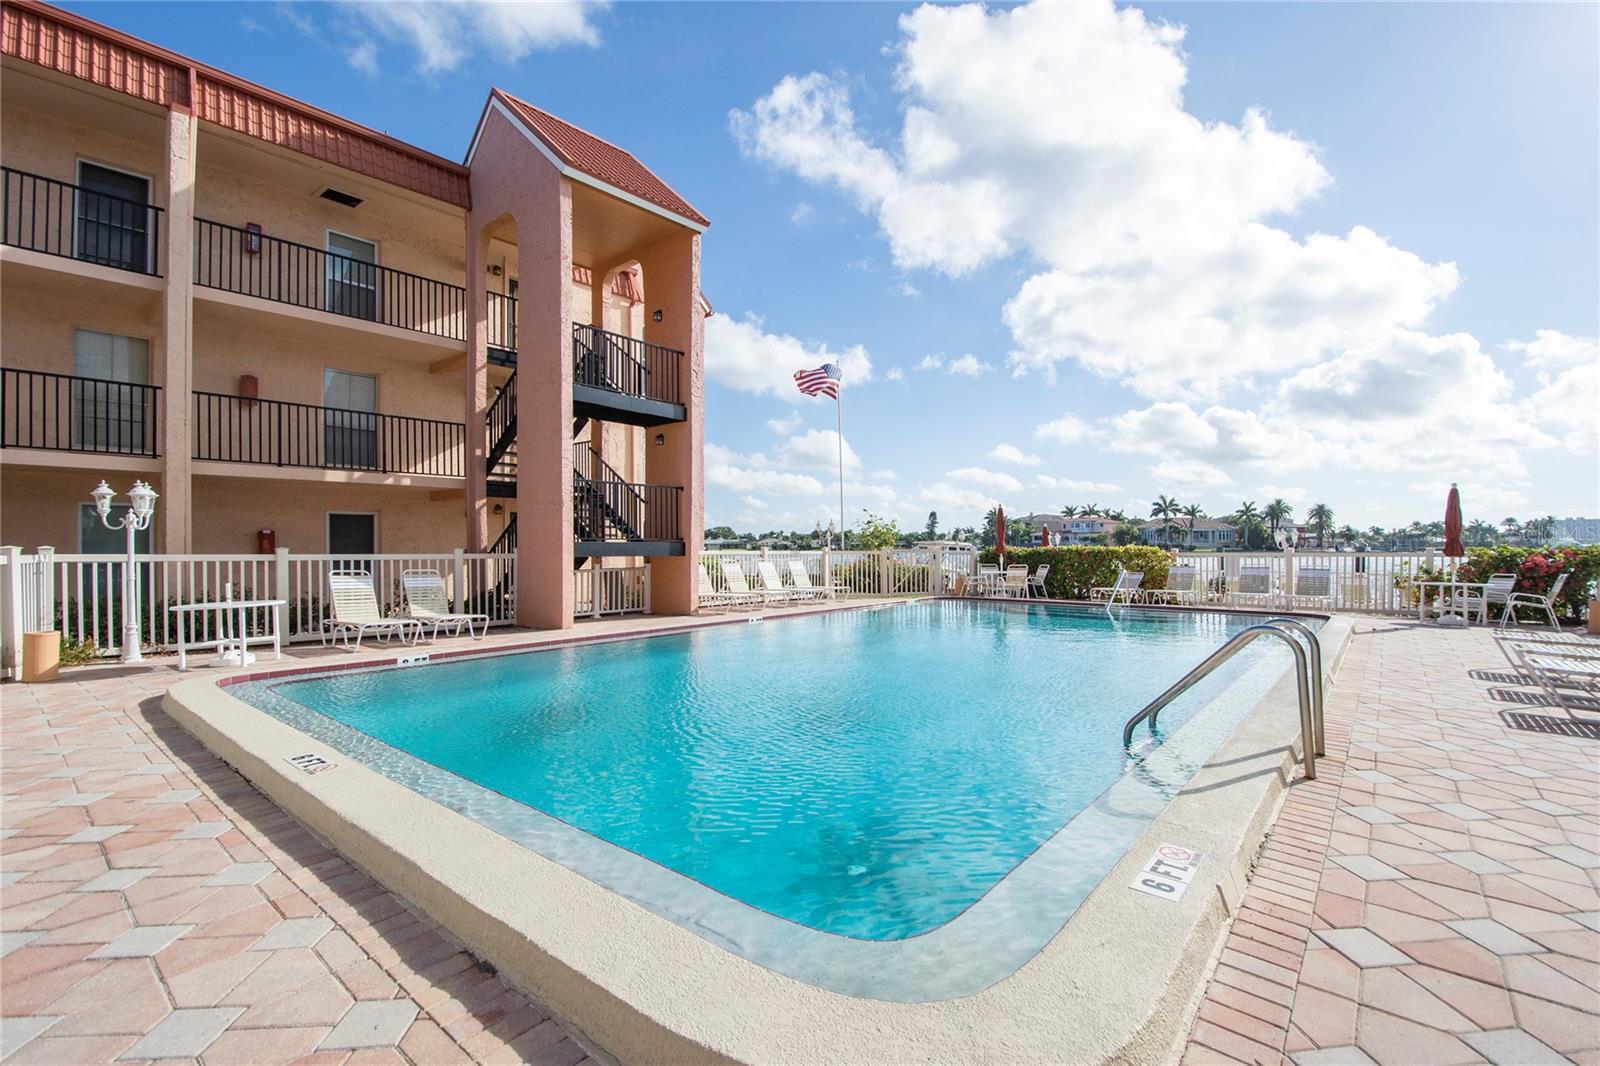 Community Pool by the Intracoastal waterfront.